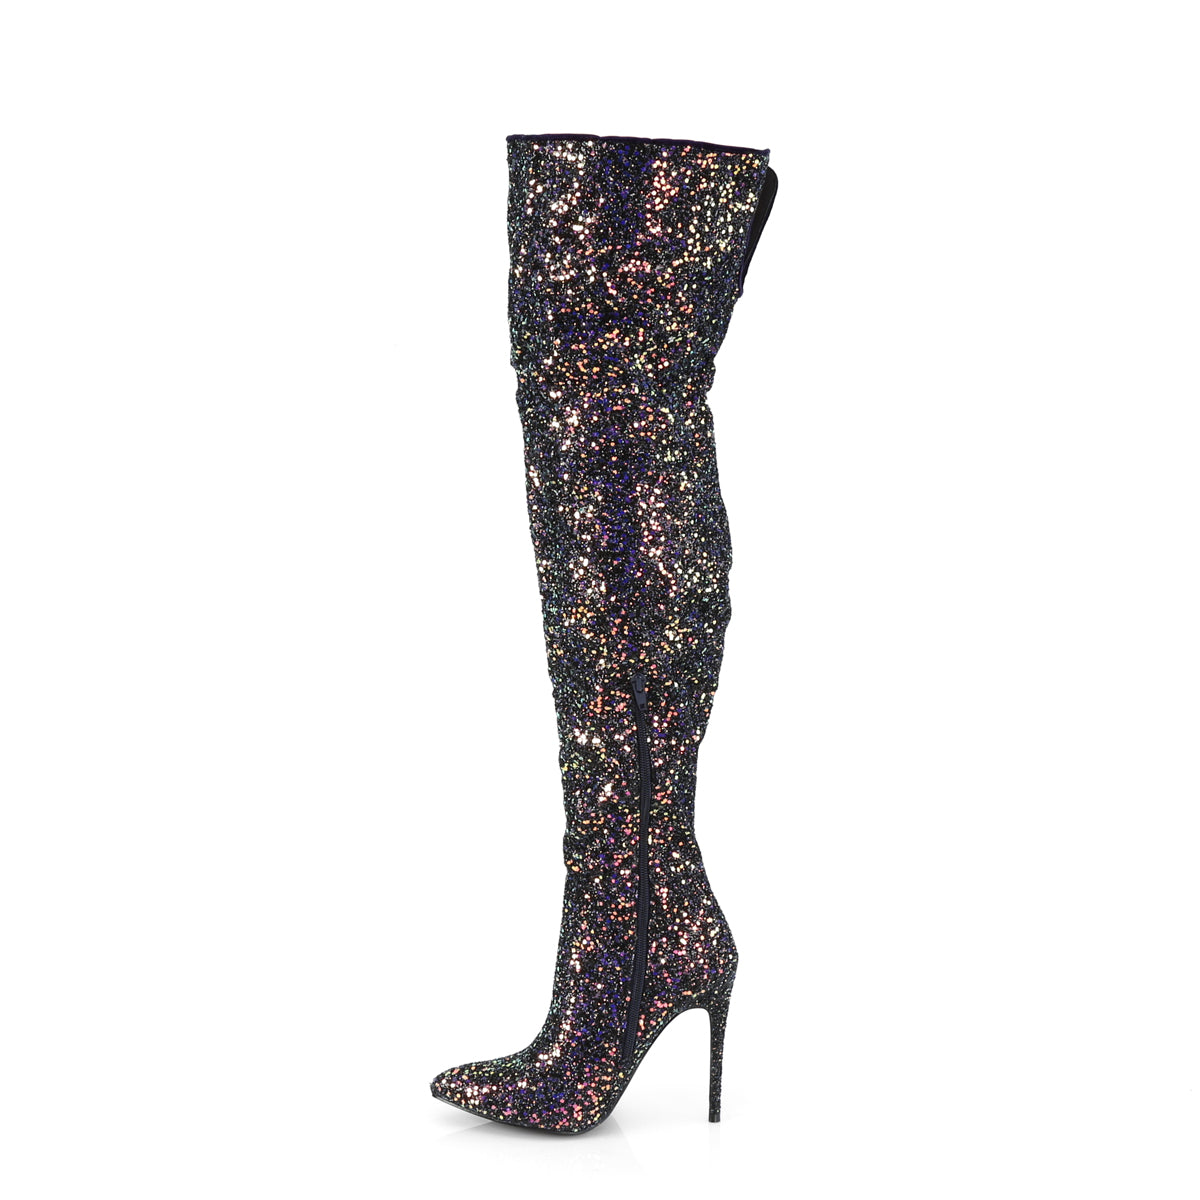 Pleaser Womens Boots. COURTLY-3015 BLK Multi Glitter